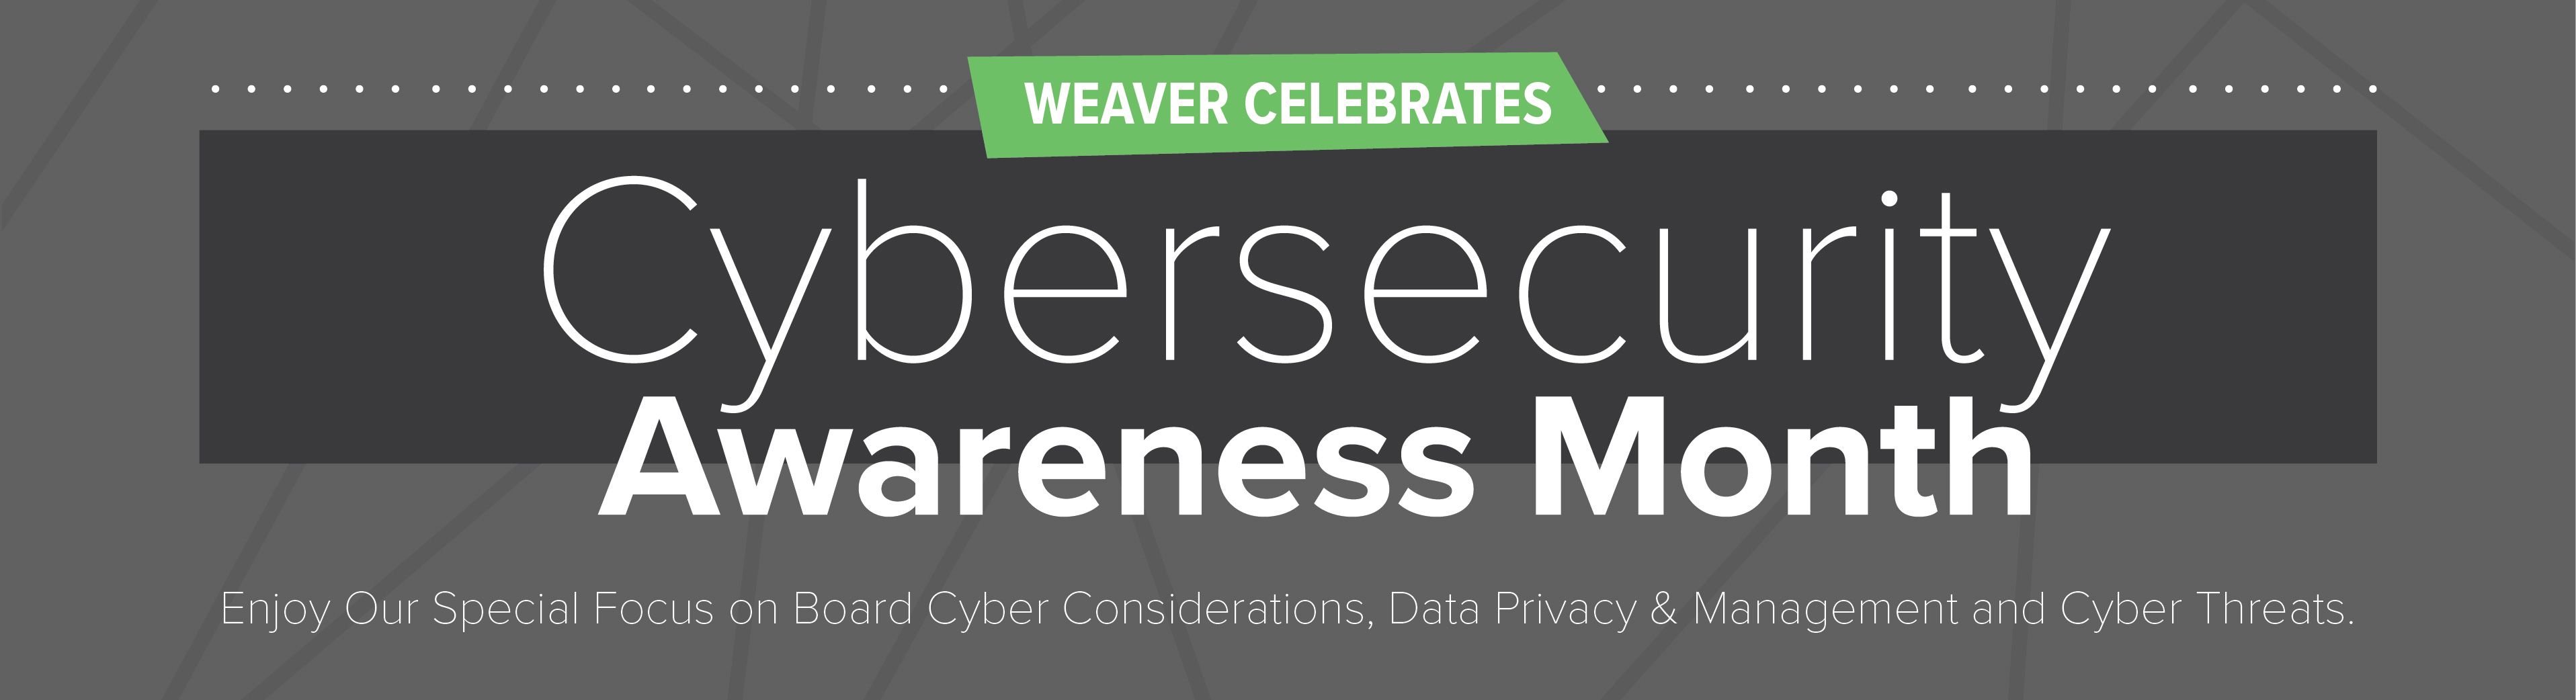 Cybersecurity Month Banner